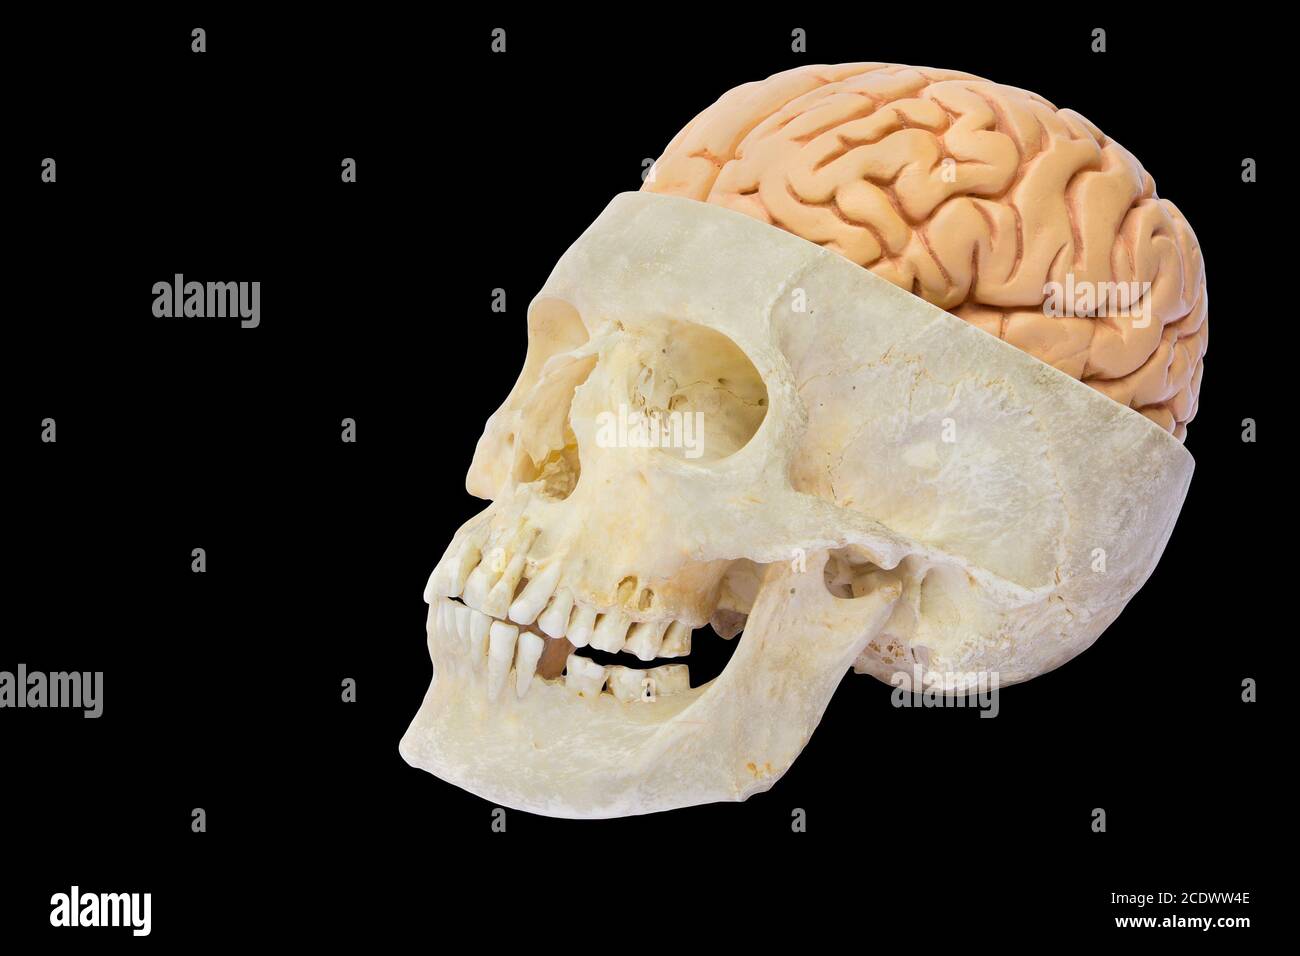 Human skull with brains on black background Stock Photo